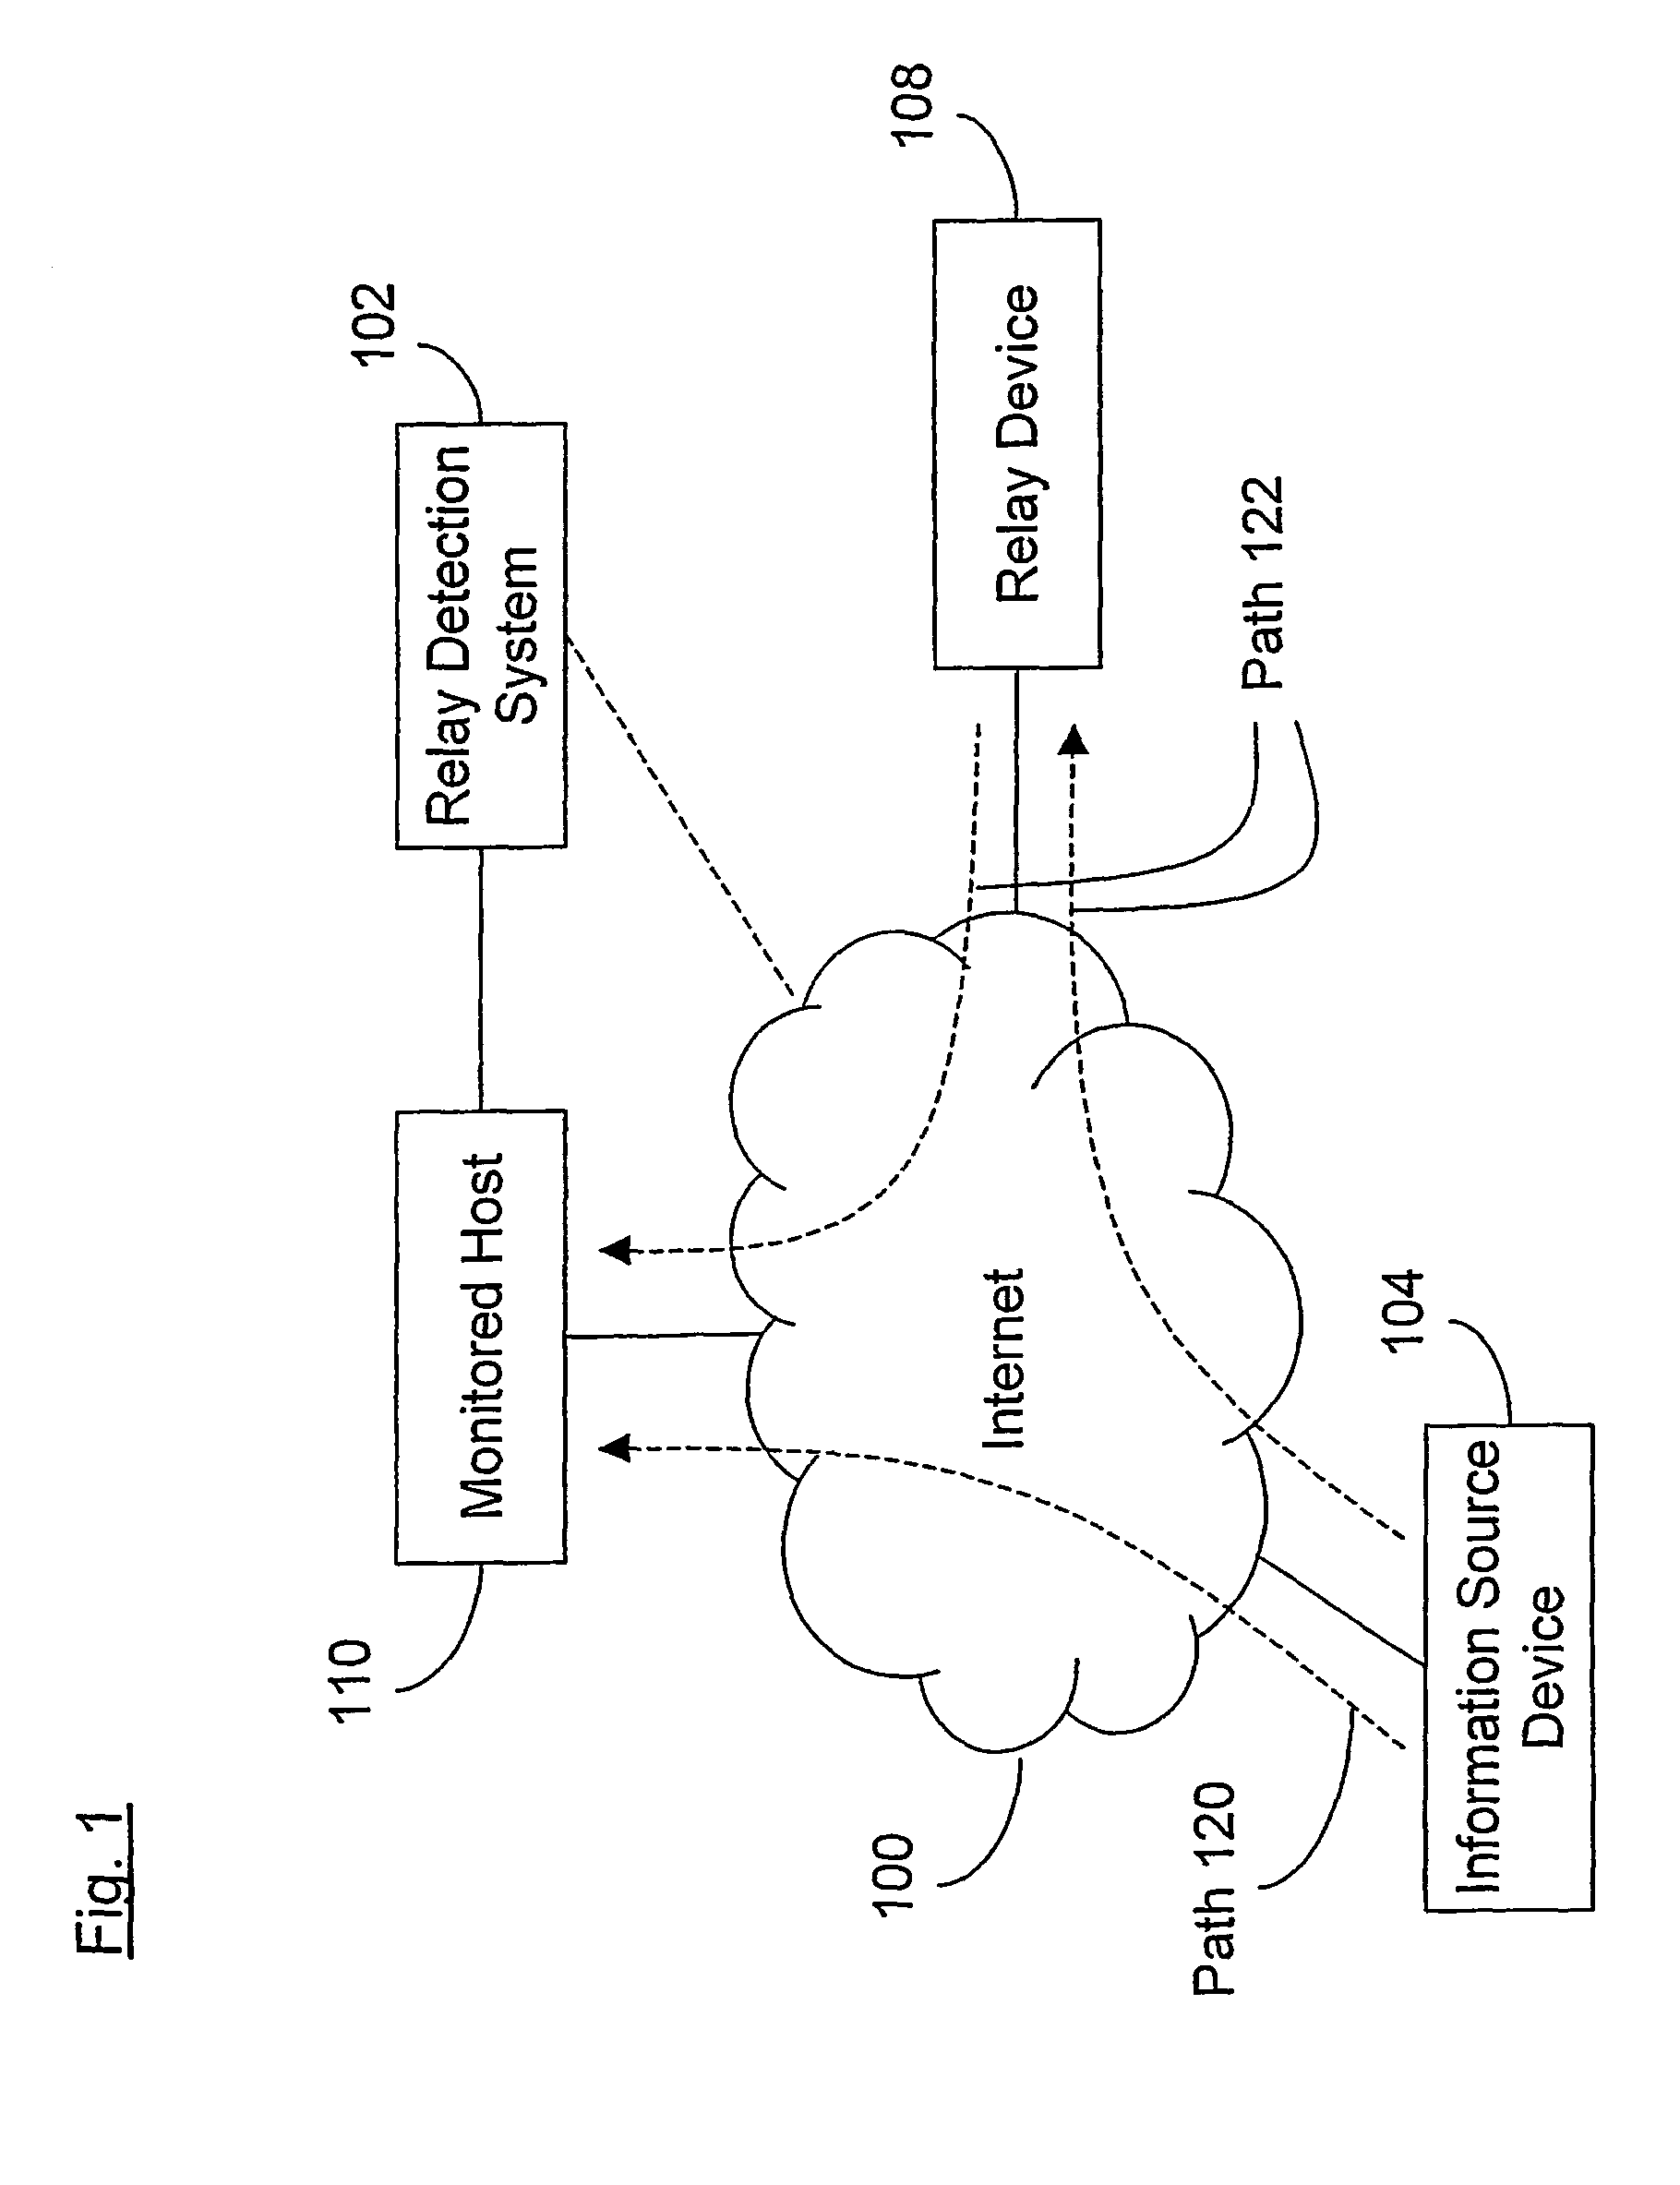 Detecting relayed communications